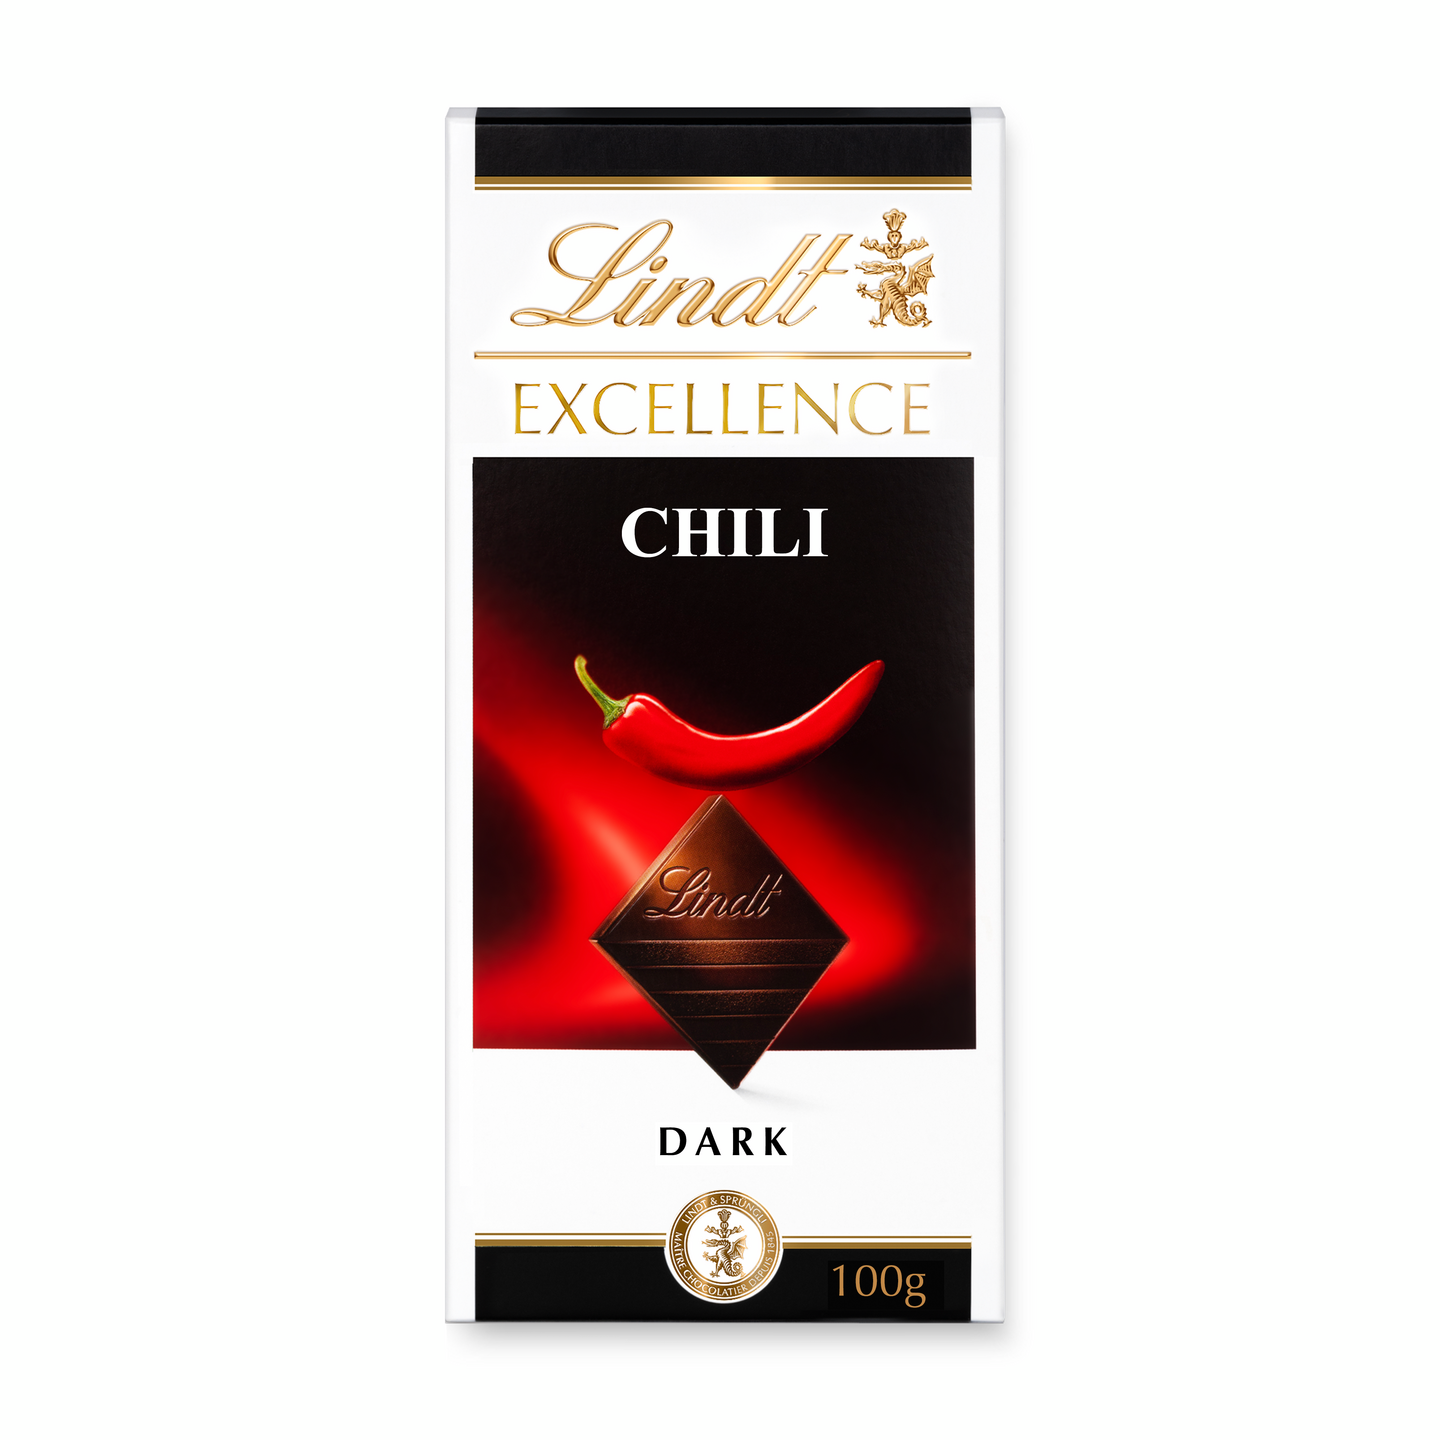 Lindt EXCELLENCE Chili tumma suklaalevy 100g